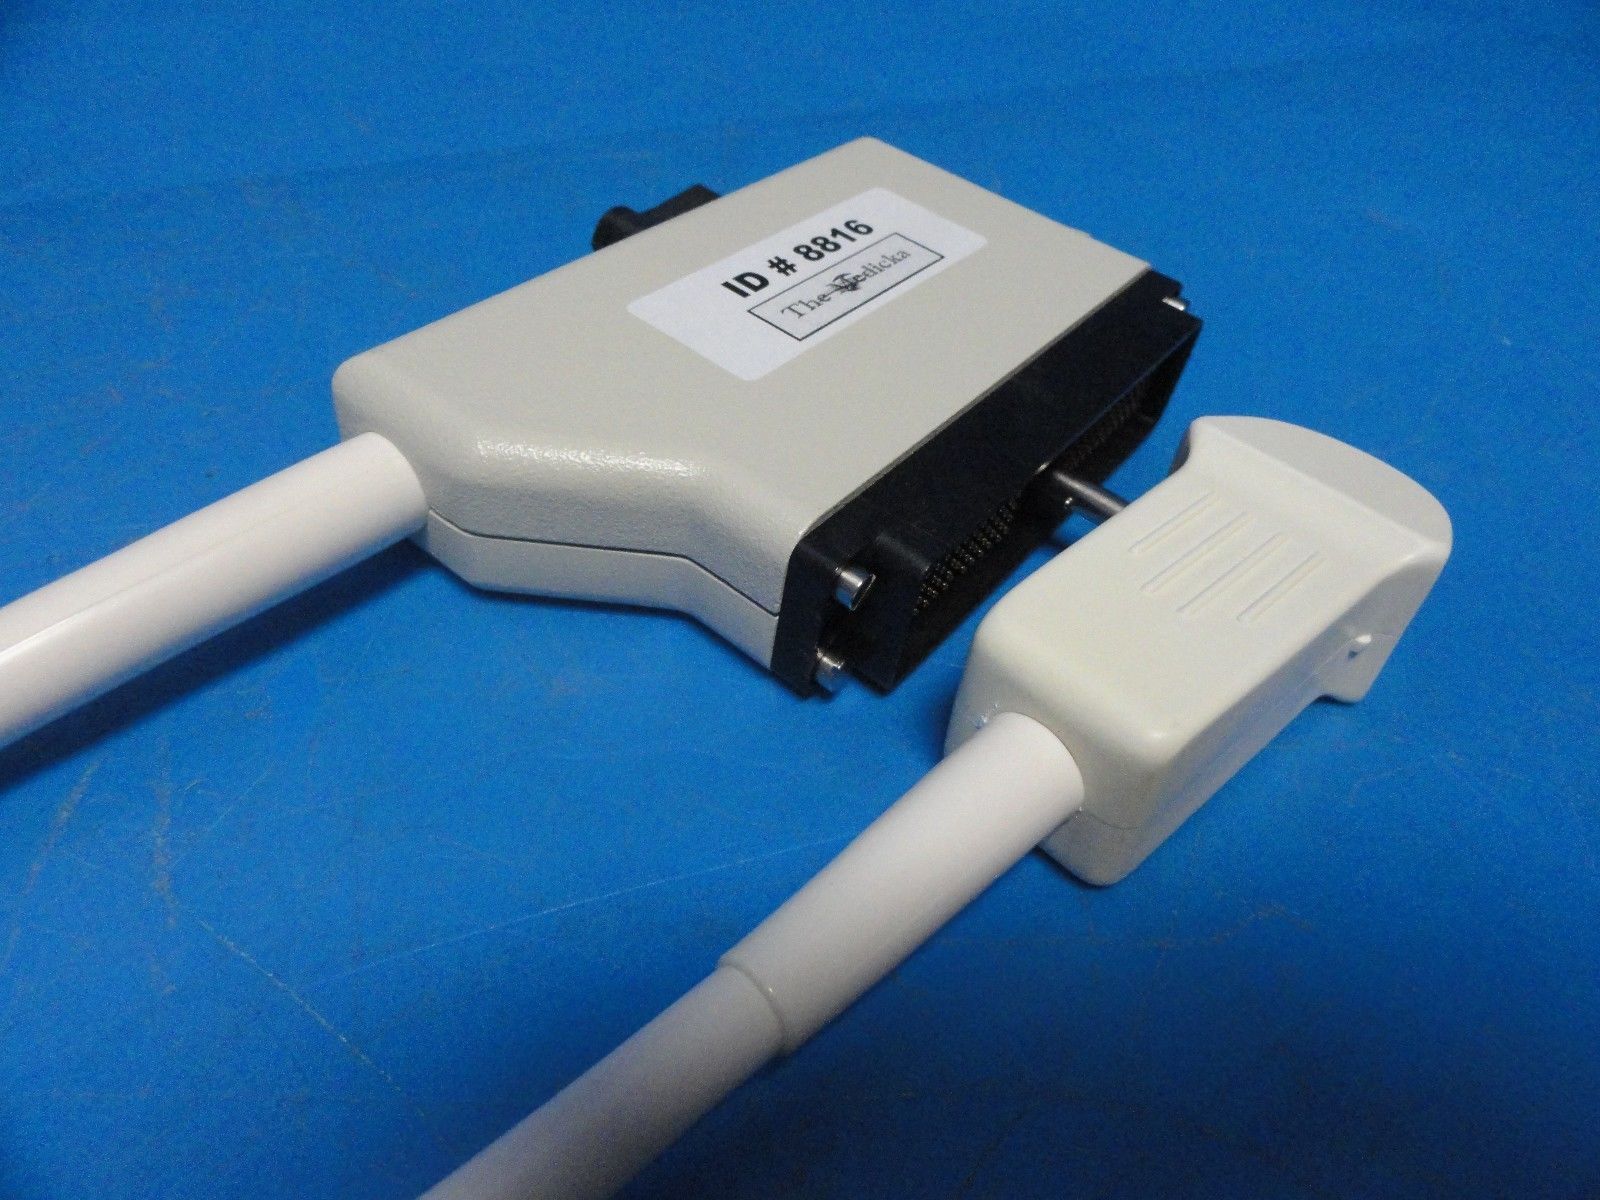 2005 Diasonics 5.0 CPACurved Phased Array Probe  for Gateway (8816) DIAGNOSTIC ULTRASOUND MACHINES FOR SALE